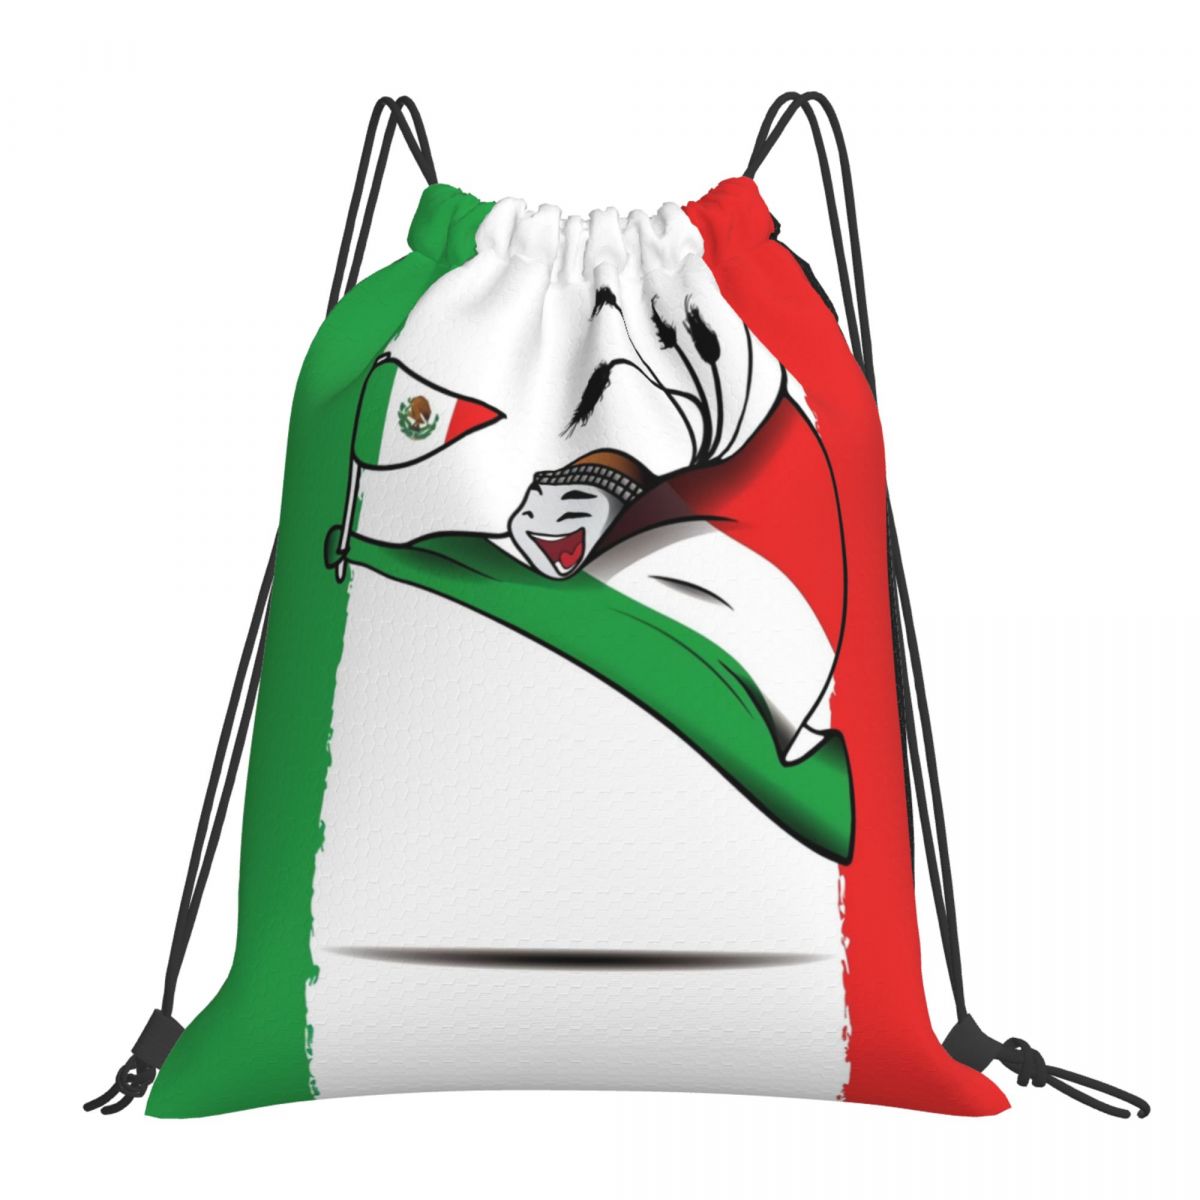 Mexico World Cup 2022 Mascot Unisex Drawstring Backpack Bag Travel Sackpack